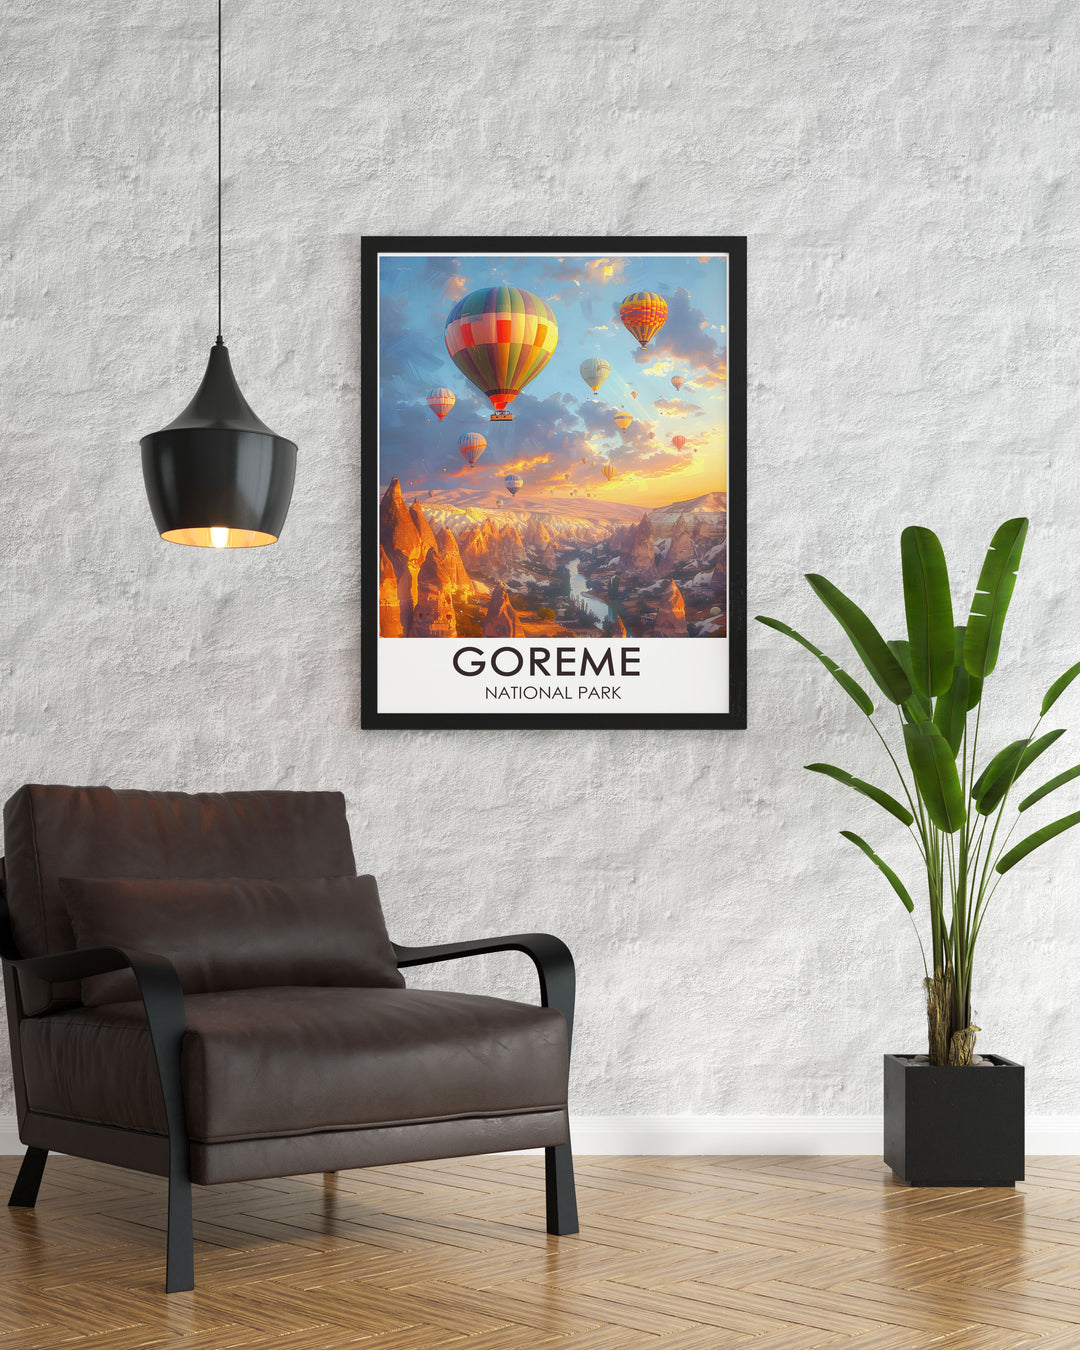 The detailed illustration of Goreme National Parks iconic Fairy Chimneys and colorful hot air balloons creates a stunning piece of wall art, celebrating the natural wonders of Cappadocia, Turkey, and bringing a sense of exploration to your decor.